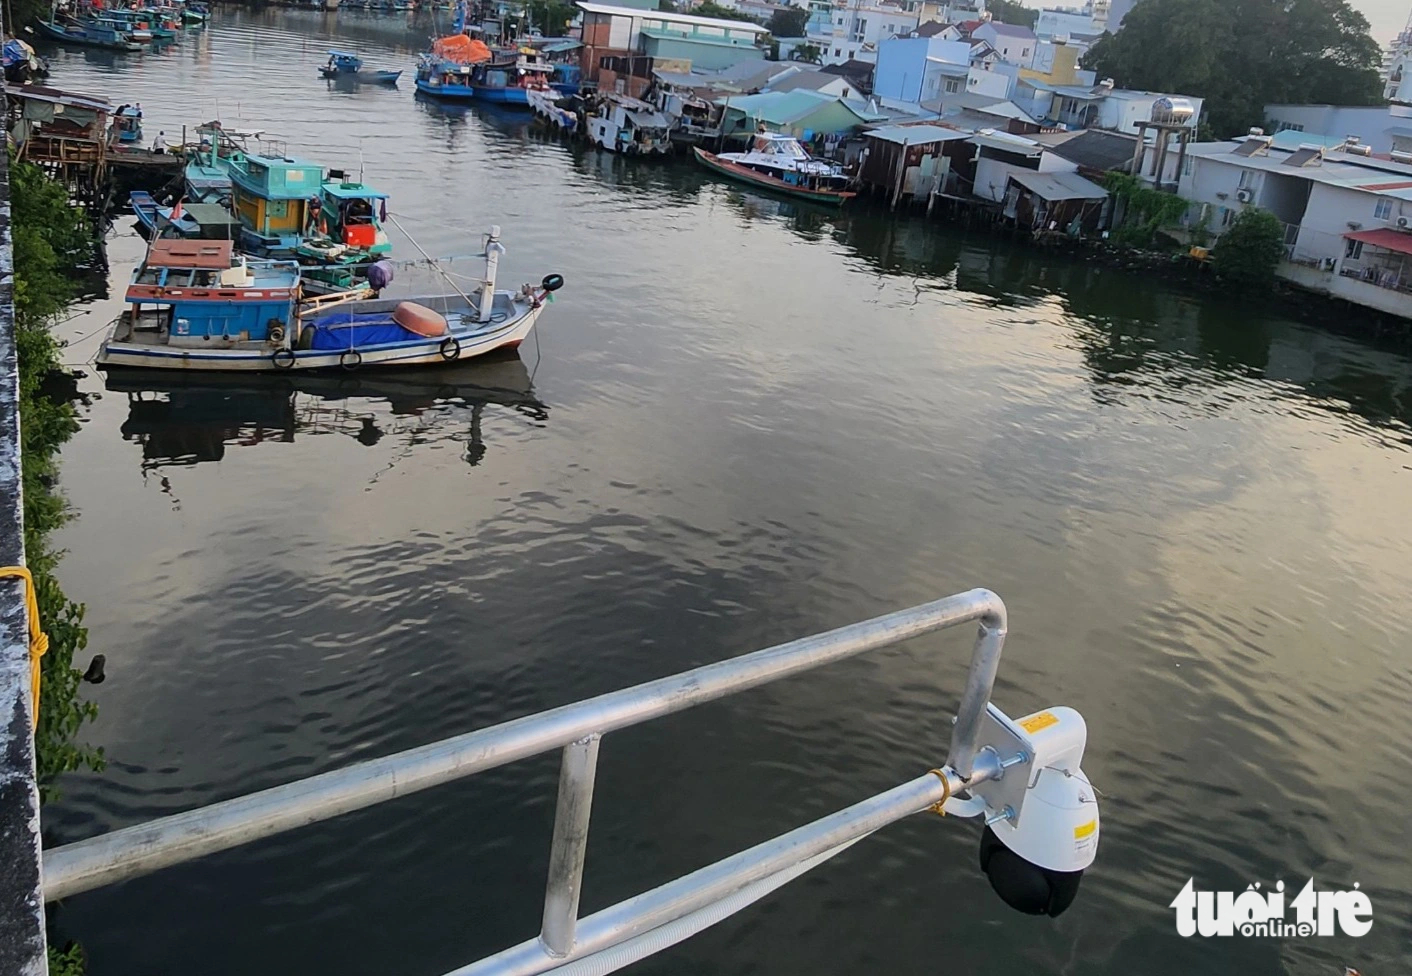 A surveillance camera was installed in the Duong Dong River area in Duong Dong Ward, Phu Quoc City, Kien Giang Province, southern Vietnam to spot those who litter. Photo: Chi Cong / Tuoi Tre